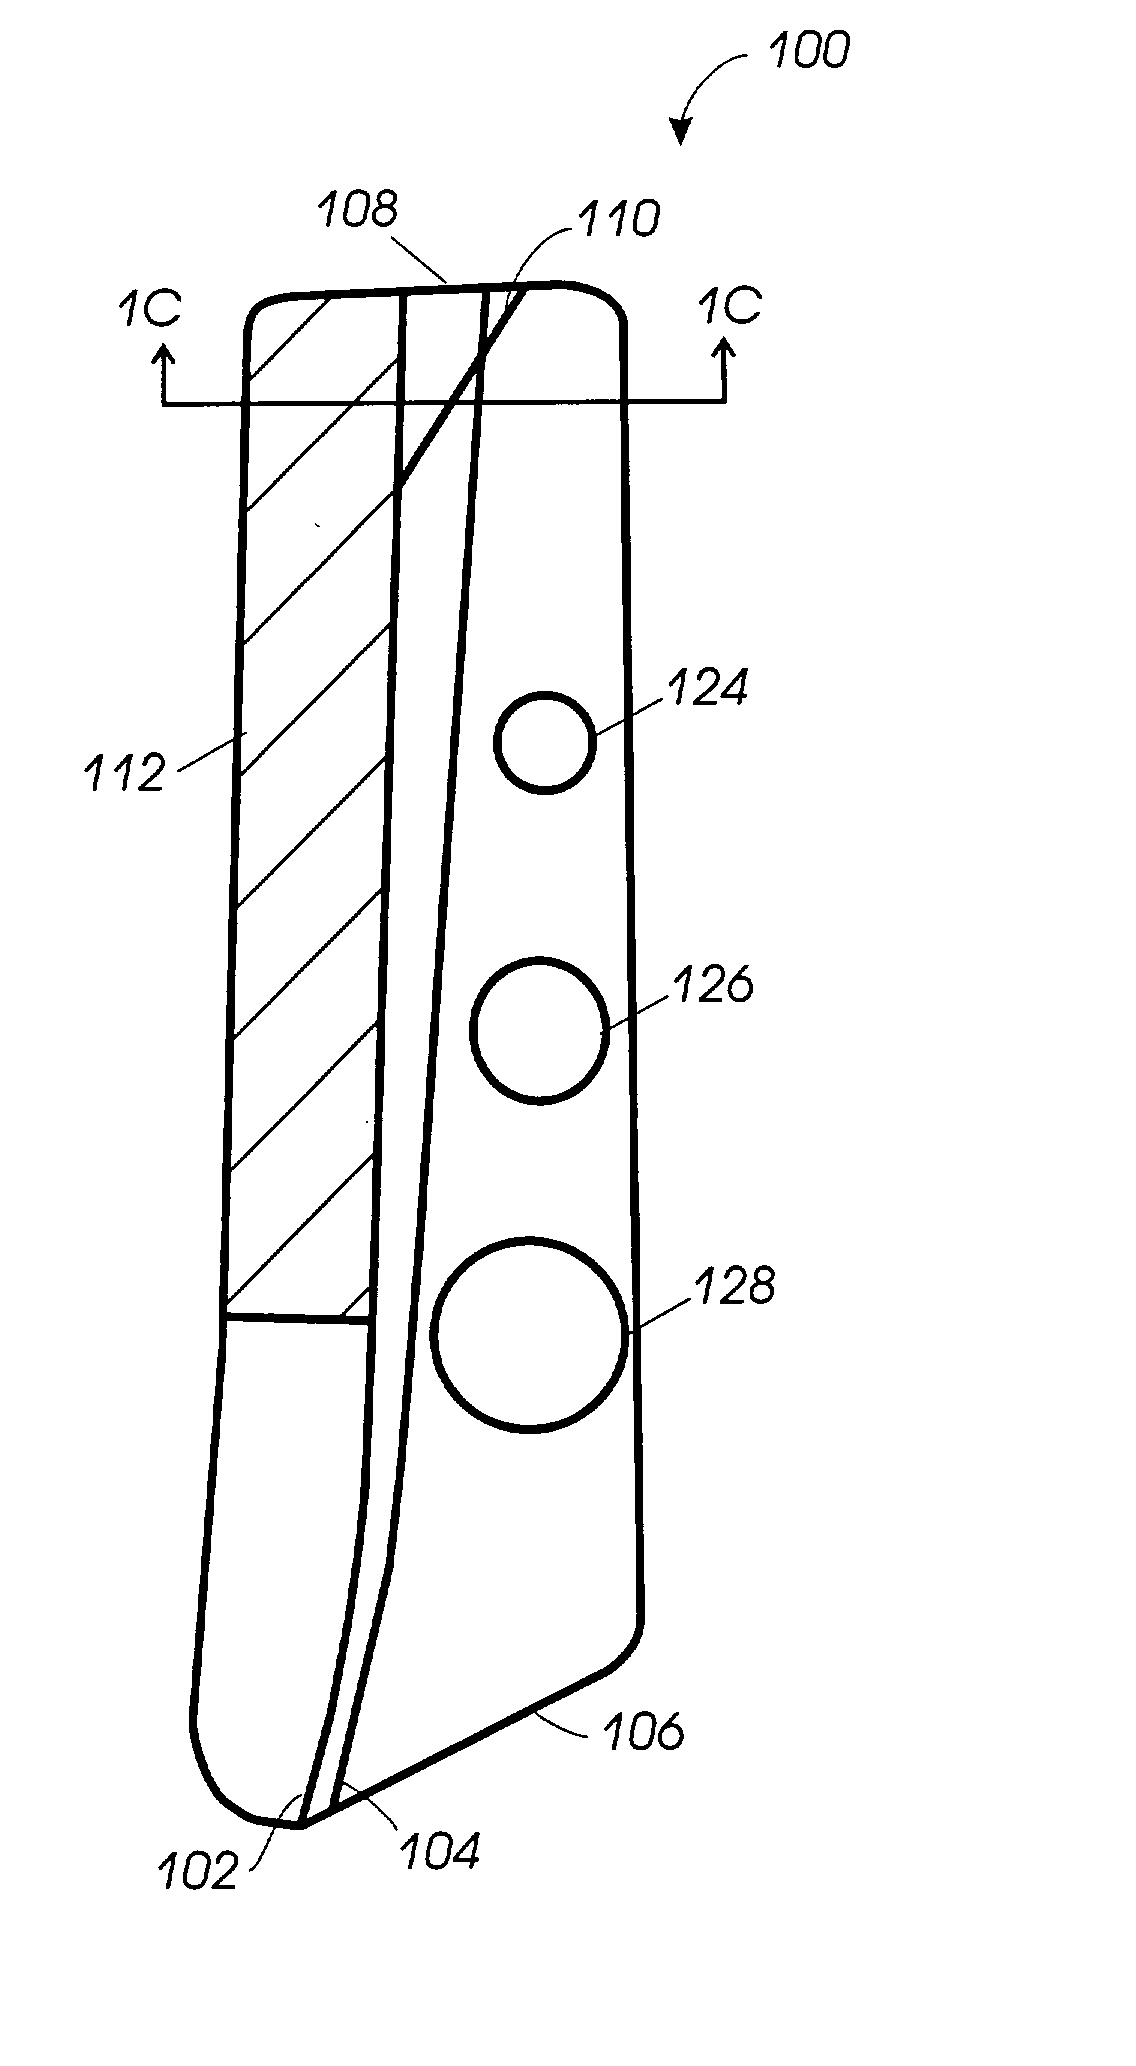 Apparatus and method for inspecting and marking repair areas on a blade